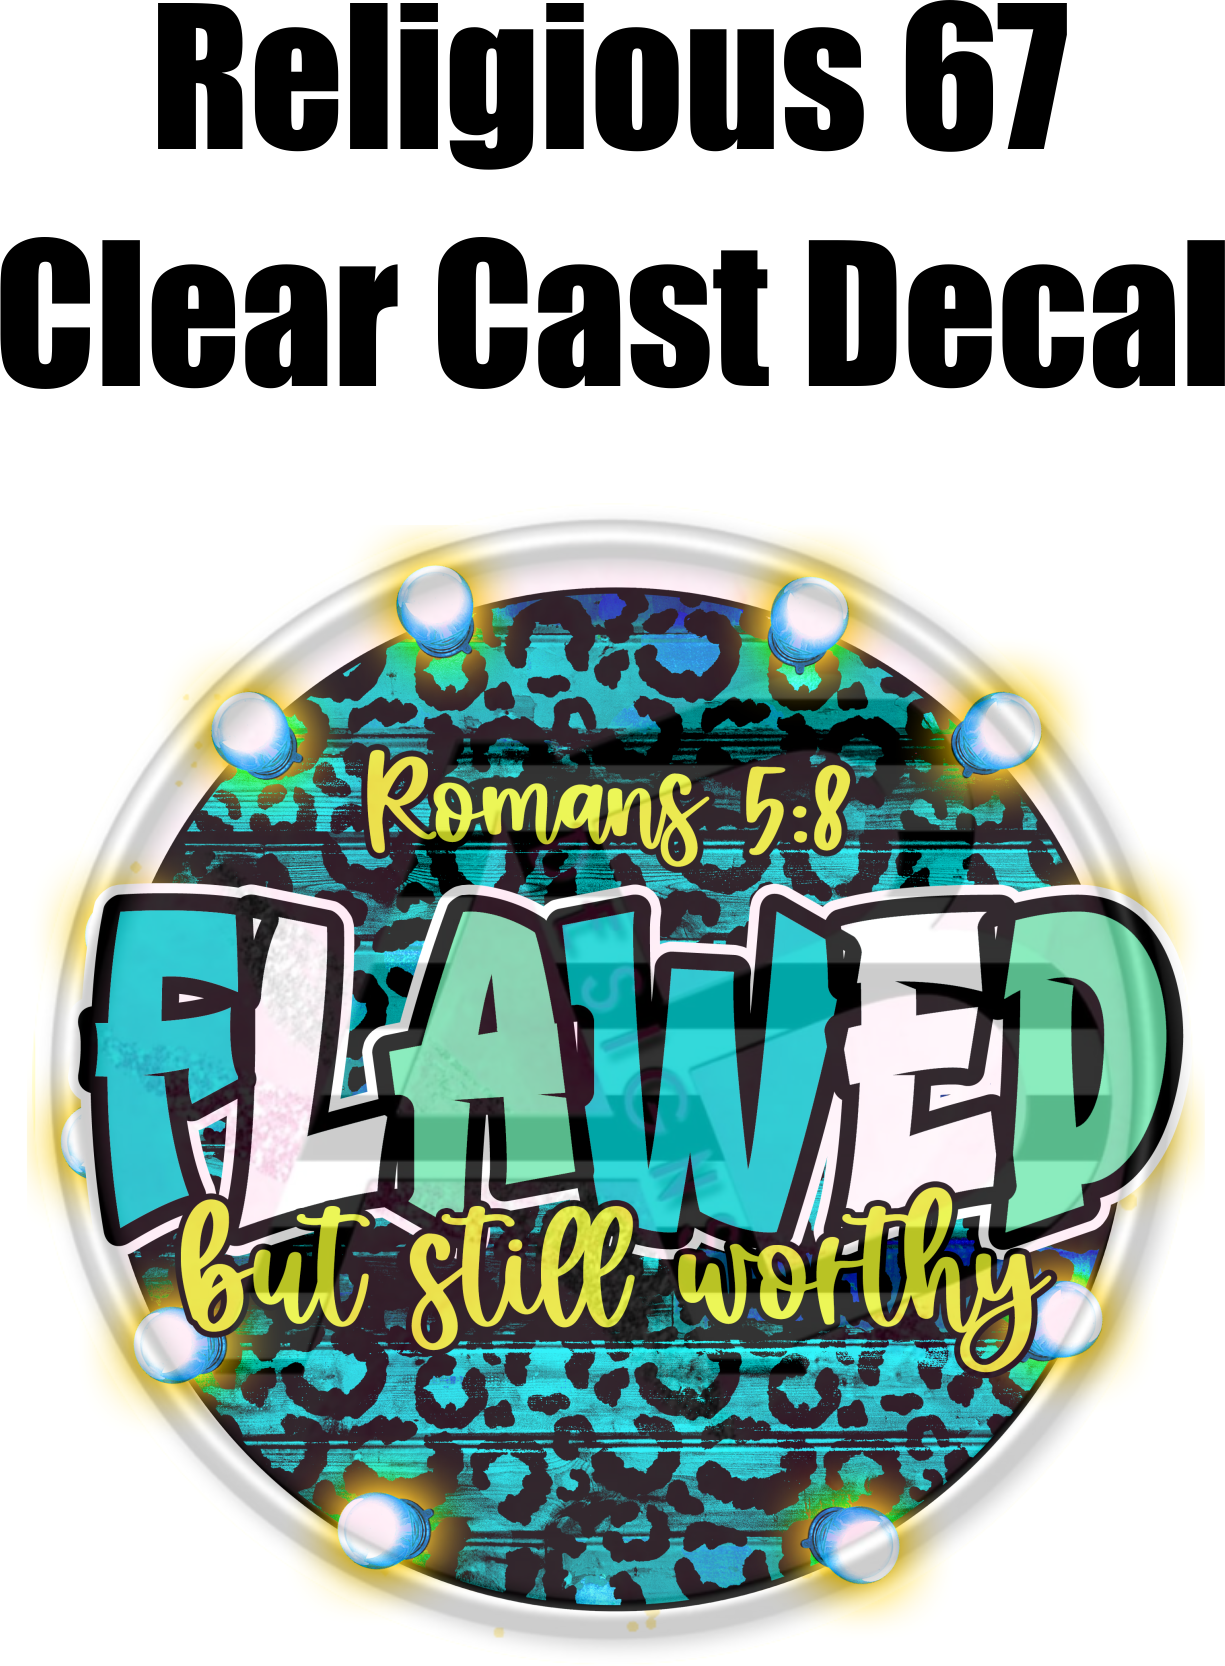 Religious 67 - Clear Cast Decal - 75